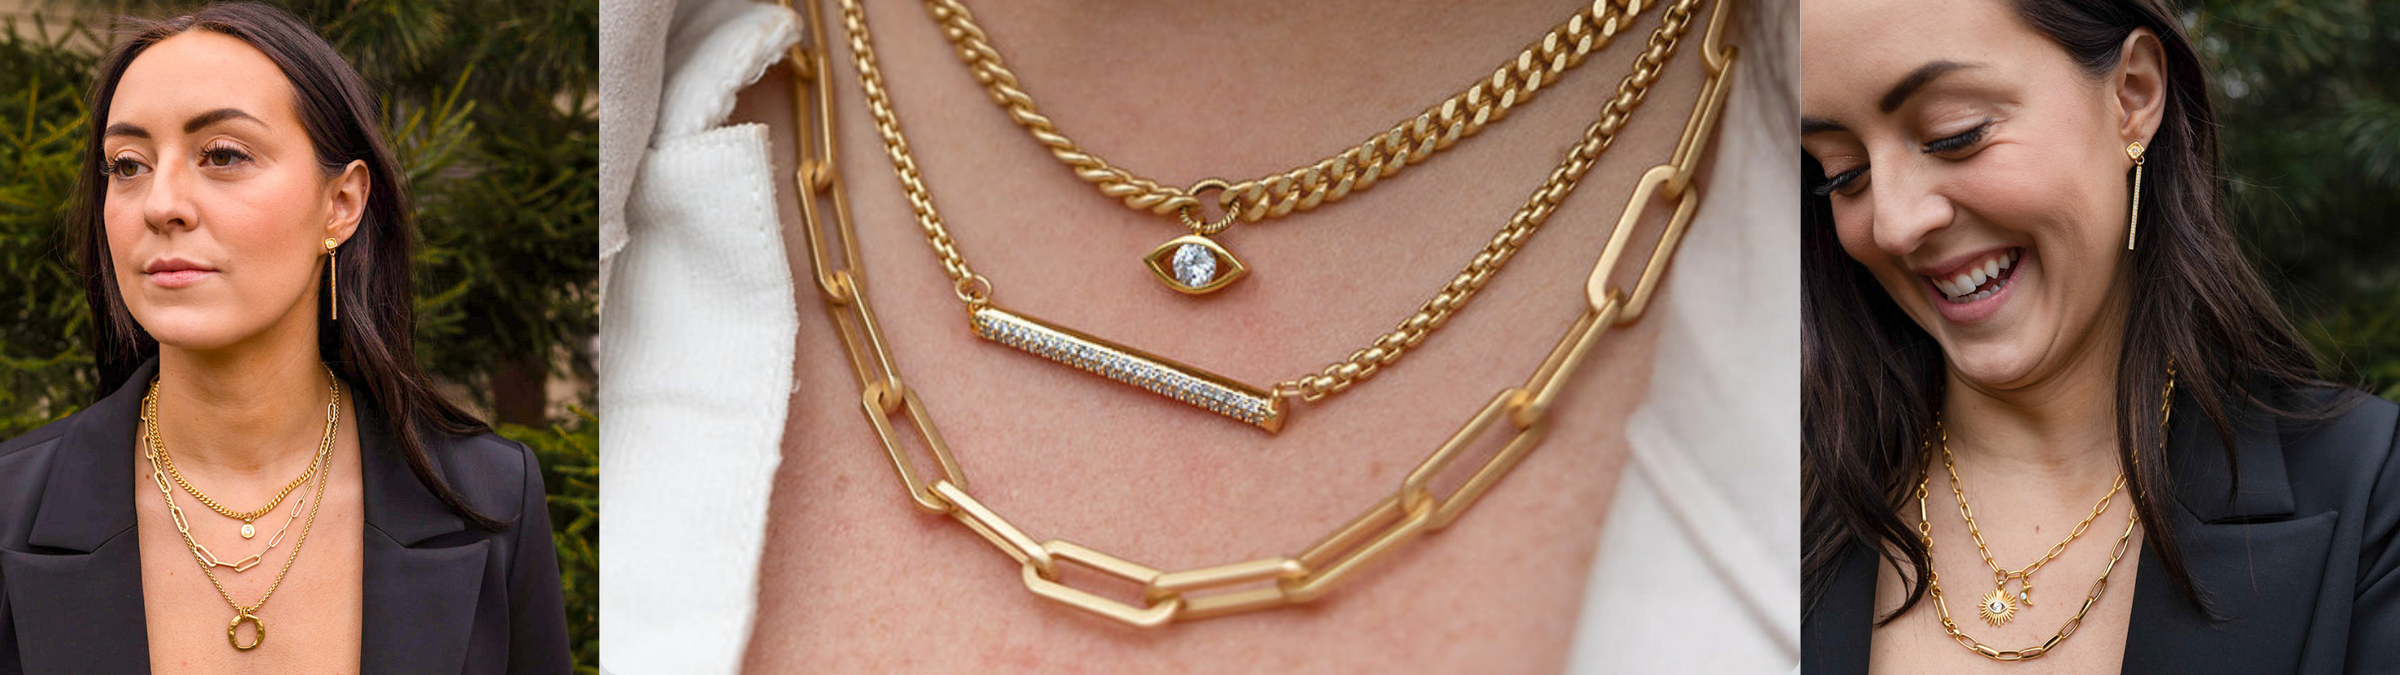 Loni Paul's necklace layering – drape yourself in timeless elegance and individuality.